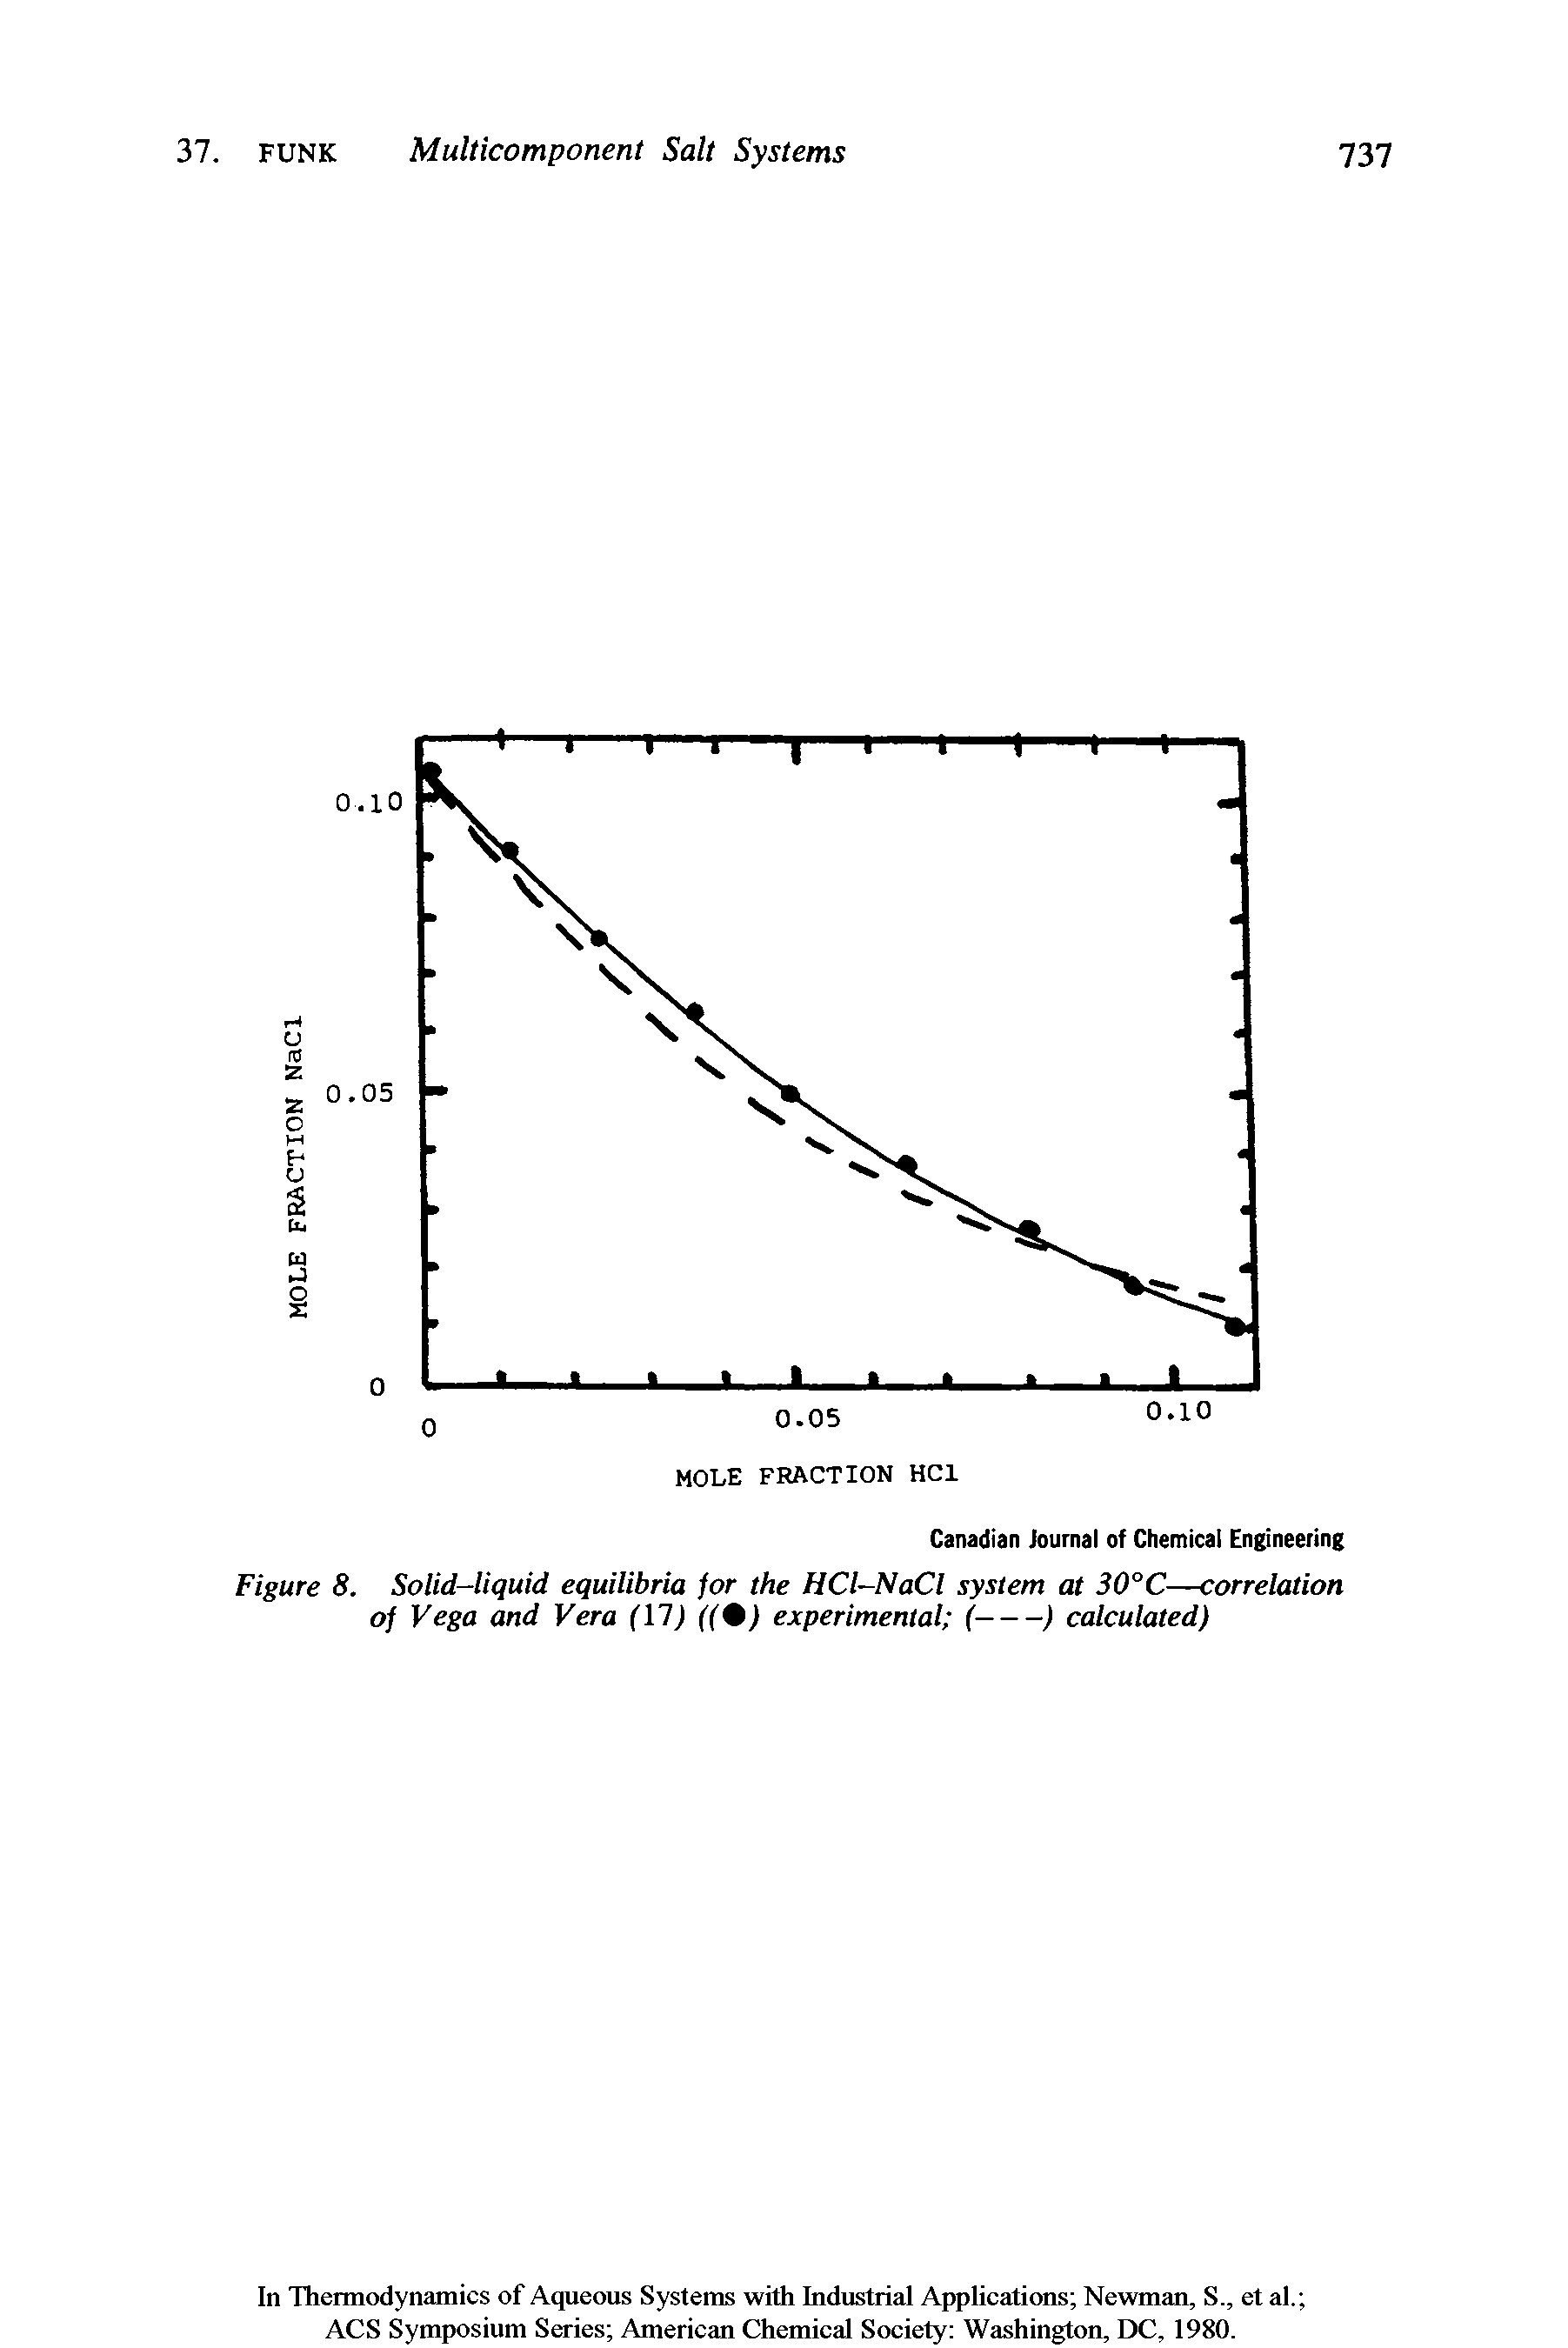 Figure 8. Solid-liquid equilibria for the HCl-NaCl system at 30°C—correlation of Vega and Vera (17) ((%) experimental (------------------) calculated)...